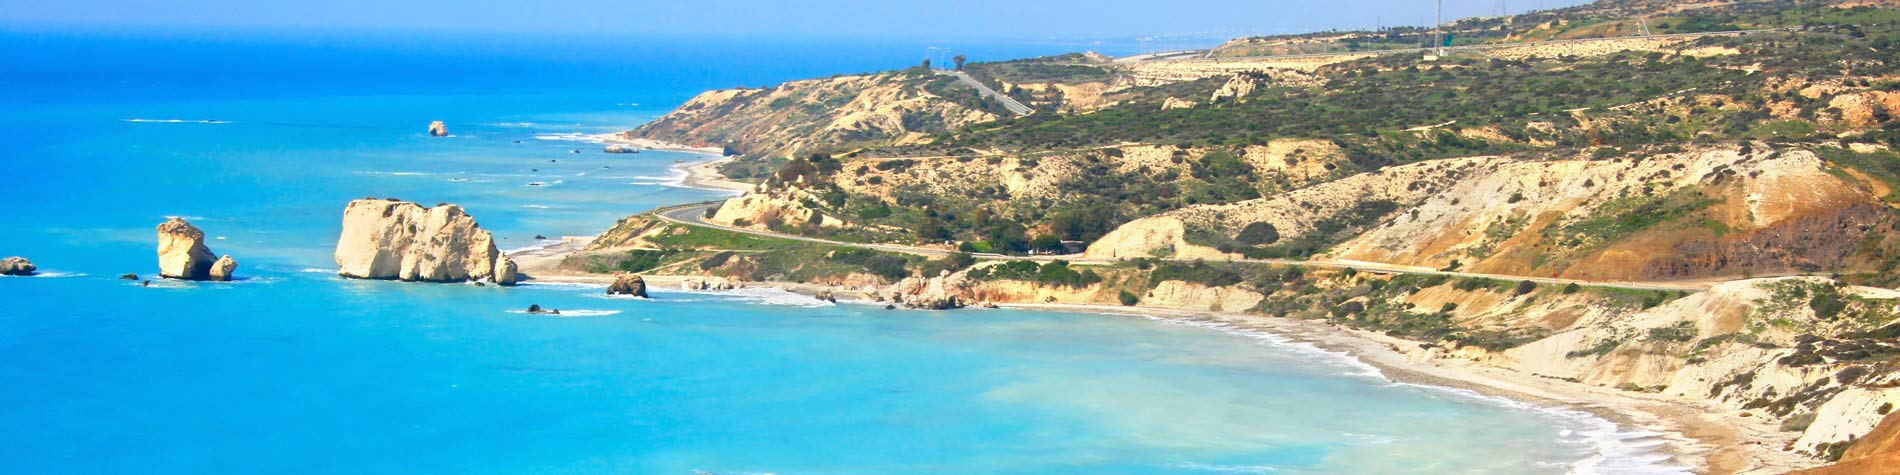 Cheap flights to Cyprus from €22.28 | Ryanair.com